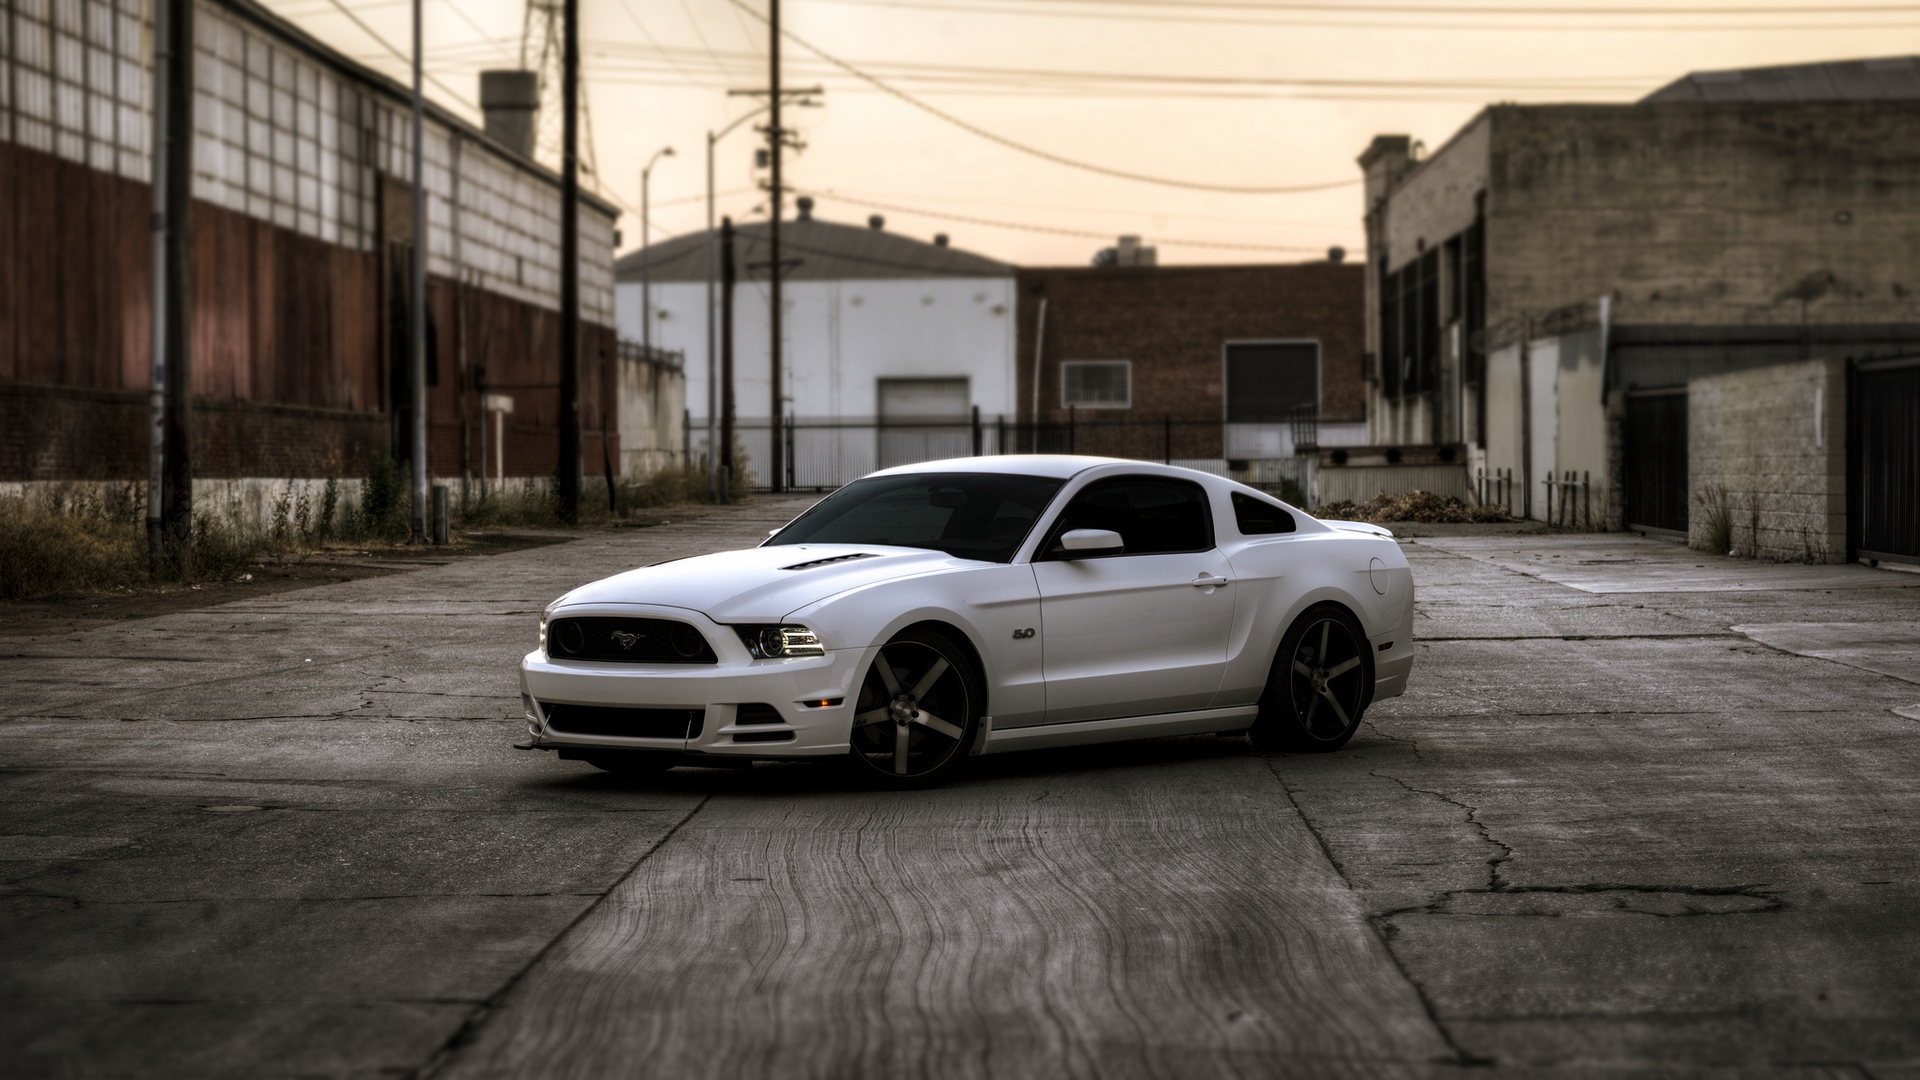 Wallpaper Ford, Mustang, Gt, Side View - Ford Mustang Gt Wallpaper 1080p - HD Wallpaper 